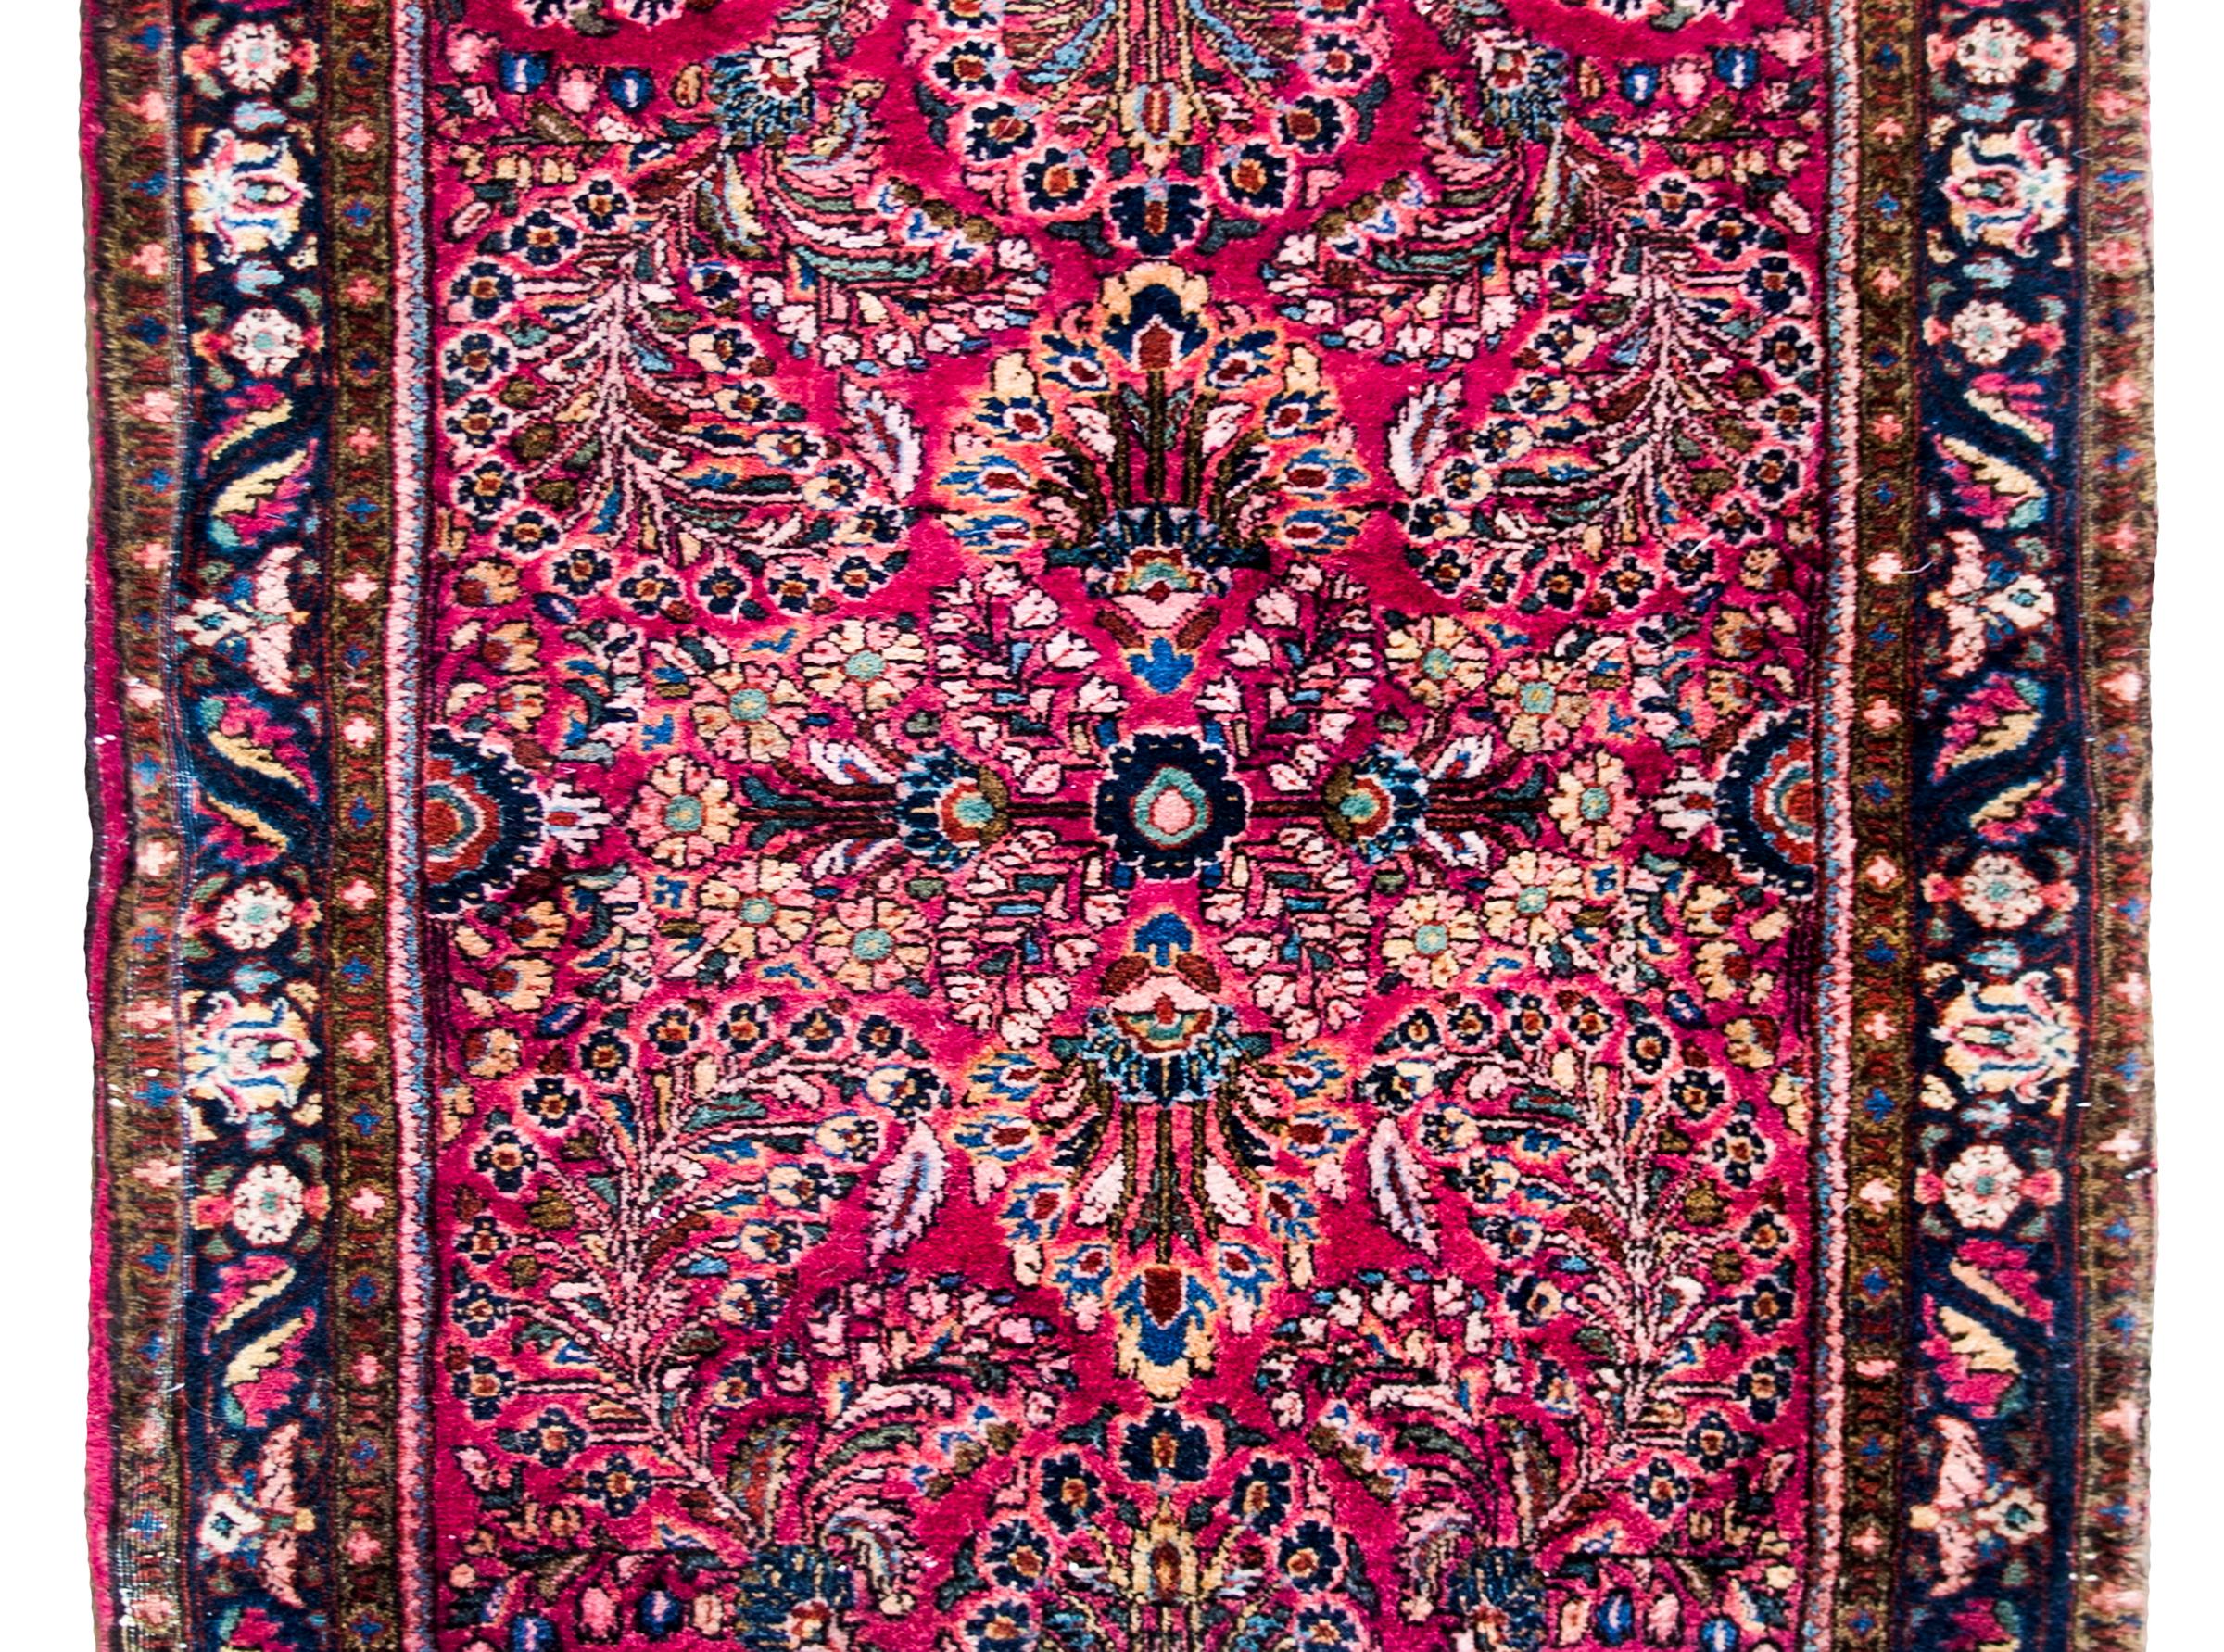 A beautiful early 20th century Persian Sarouk runner with a large-scale mirrored floral pattern containing myriad floral clusters all woven in light and dark indigo, pink, white, and olive green set against a brilliant cranberry background, and